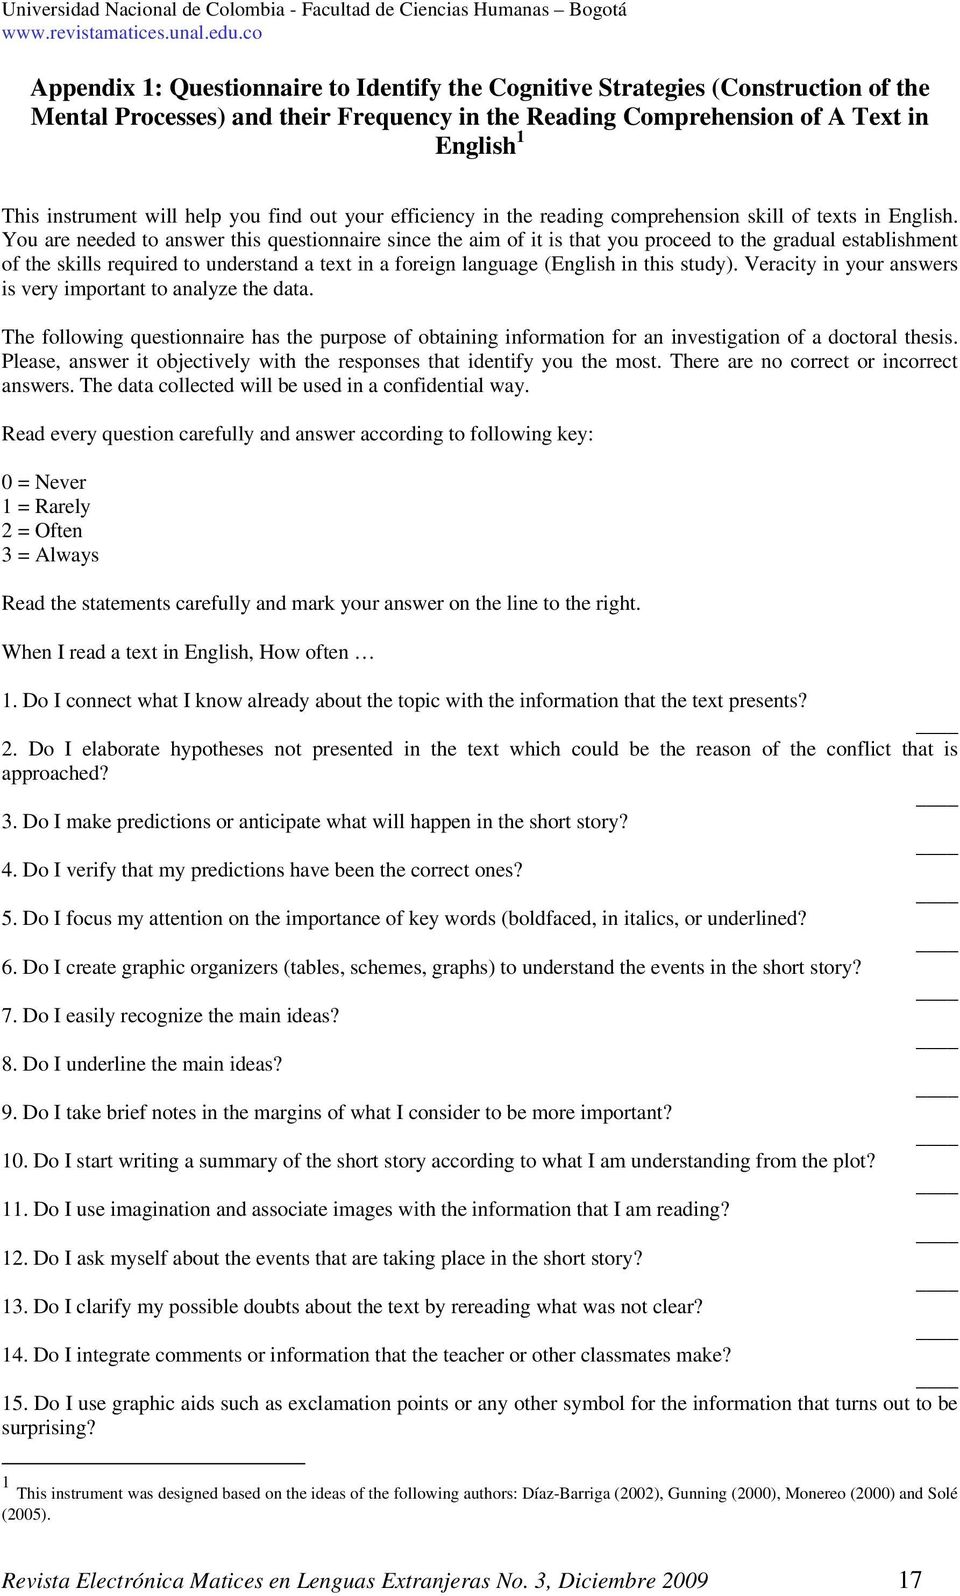 You are needed to answer this questionnaire since the aim of it is that you proceed to the gradual establishment of the skills required to understand a text in a foreign language (English in this